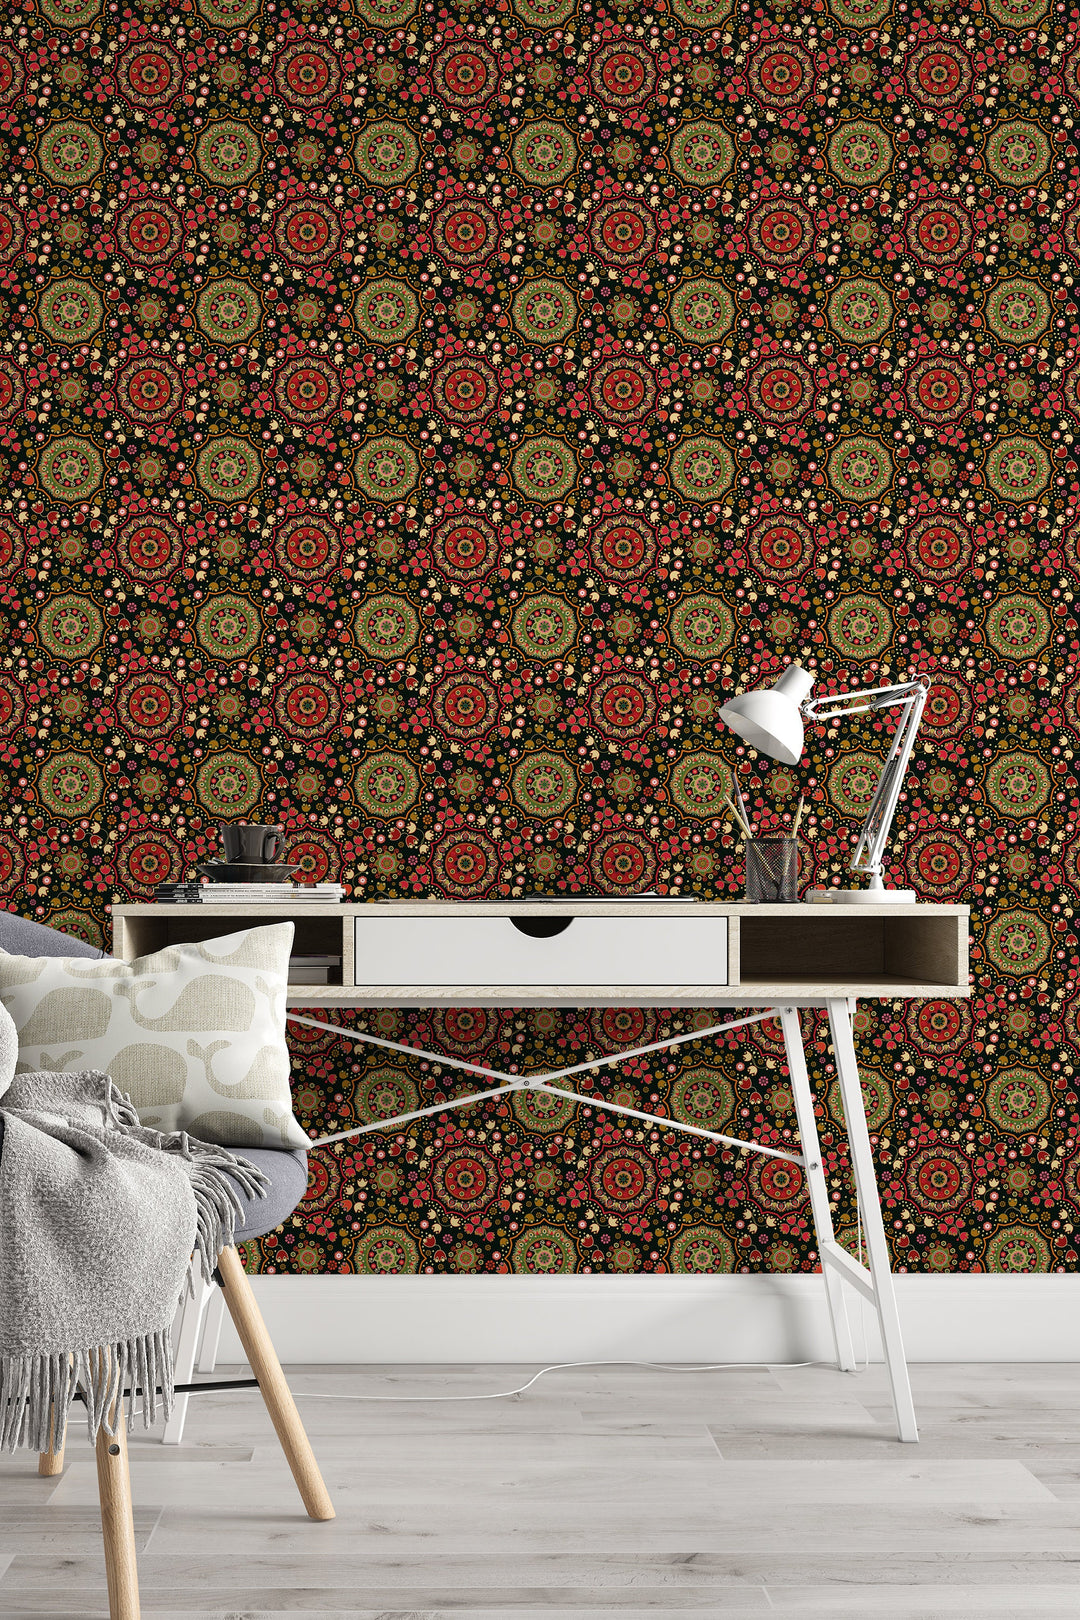 Indian pattern floral Self Adhesive Peel and Stick Wallpaper #3237